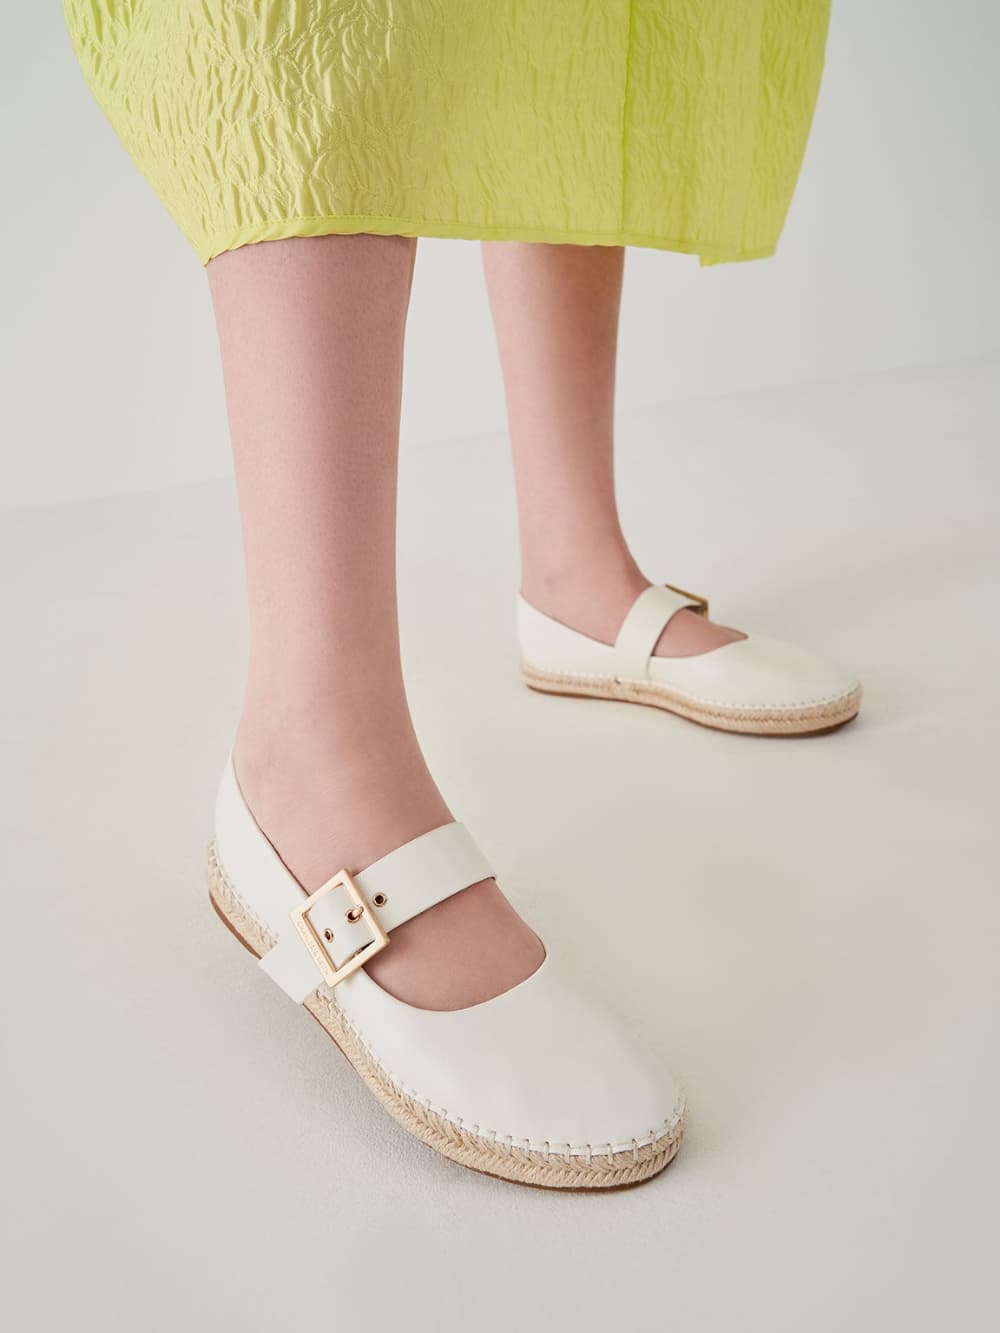 Women’s white buckled espadrille flats - CHARLES & KEITH